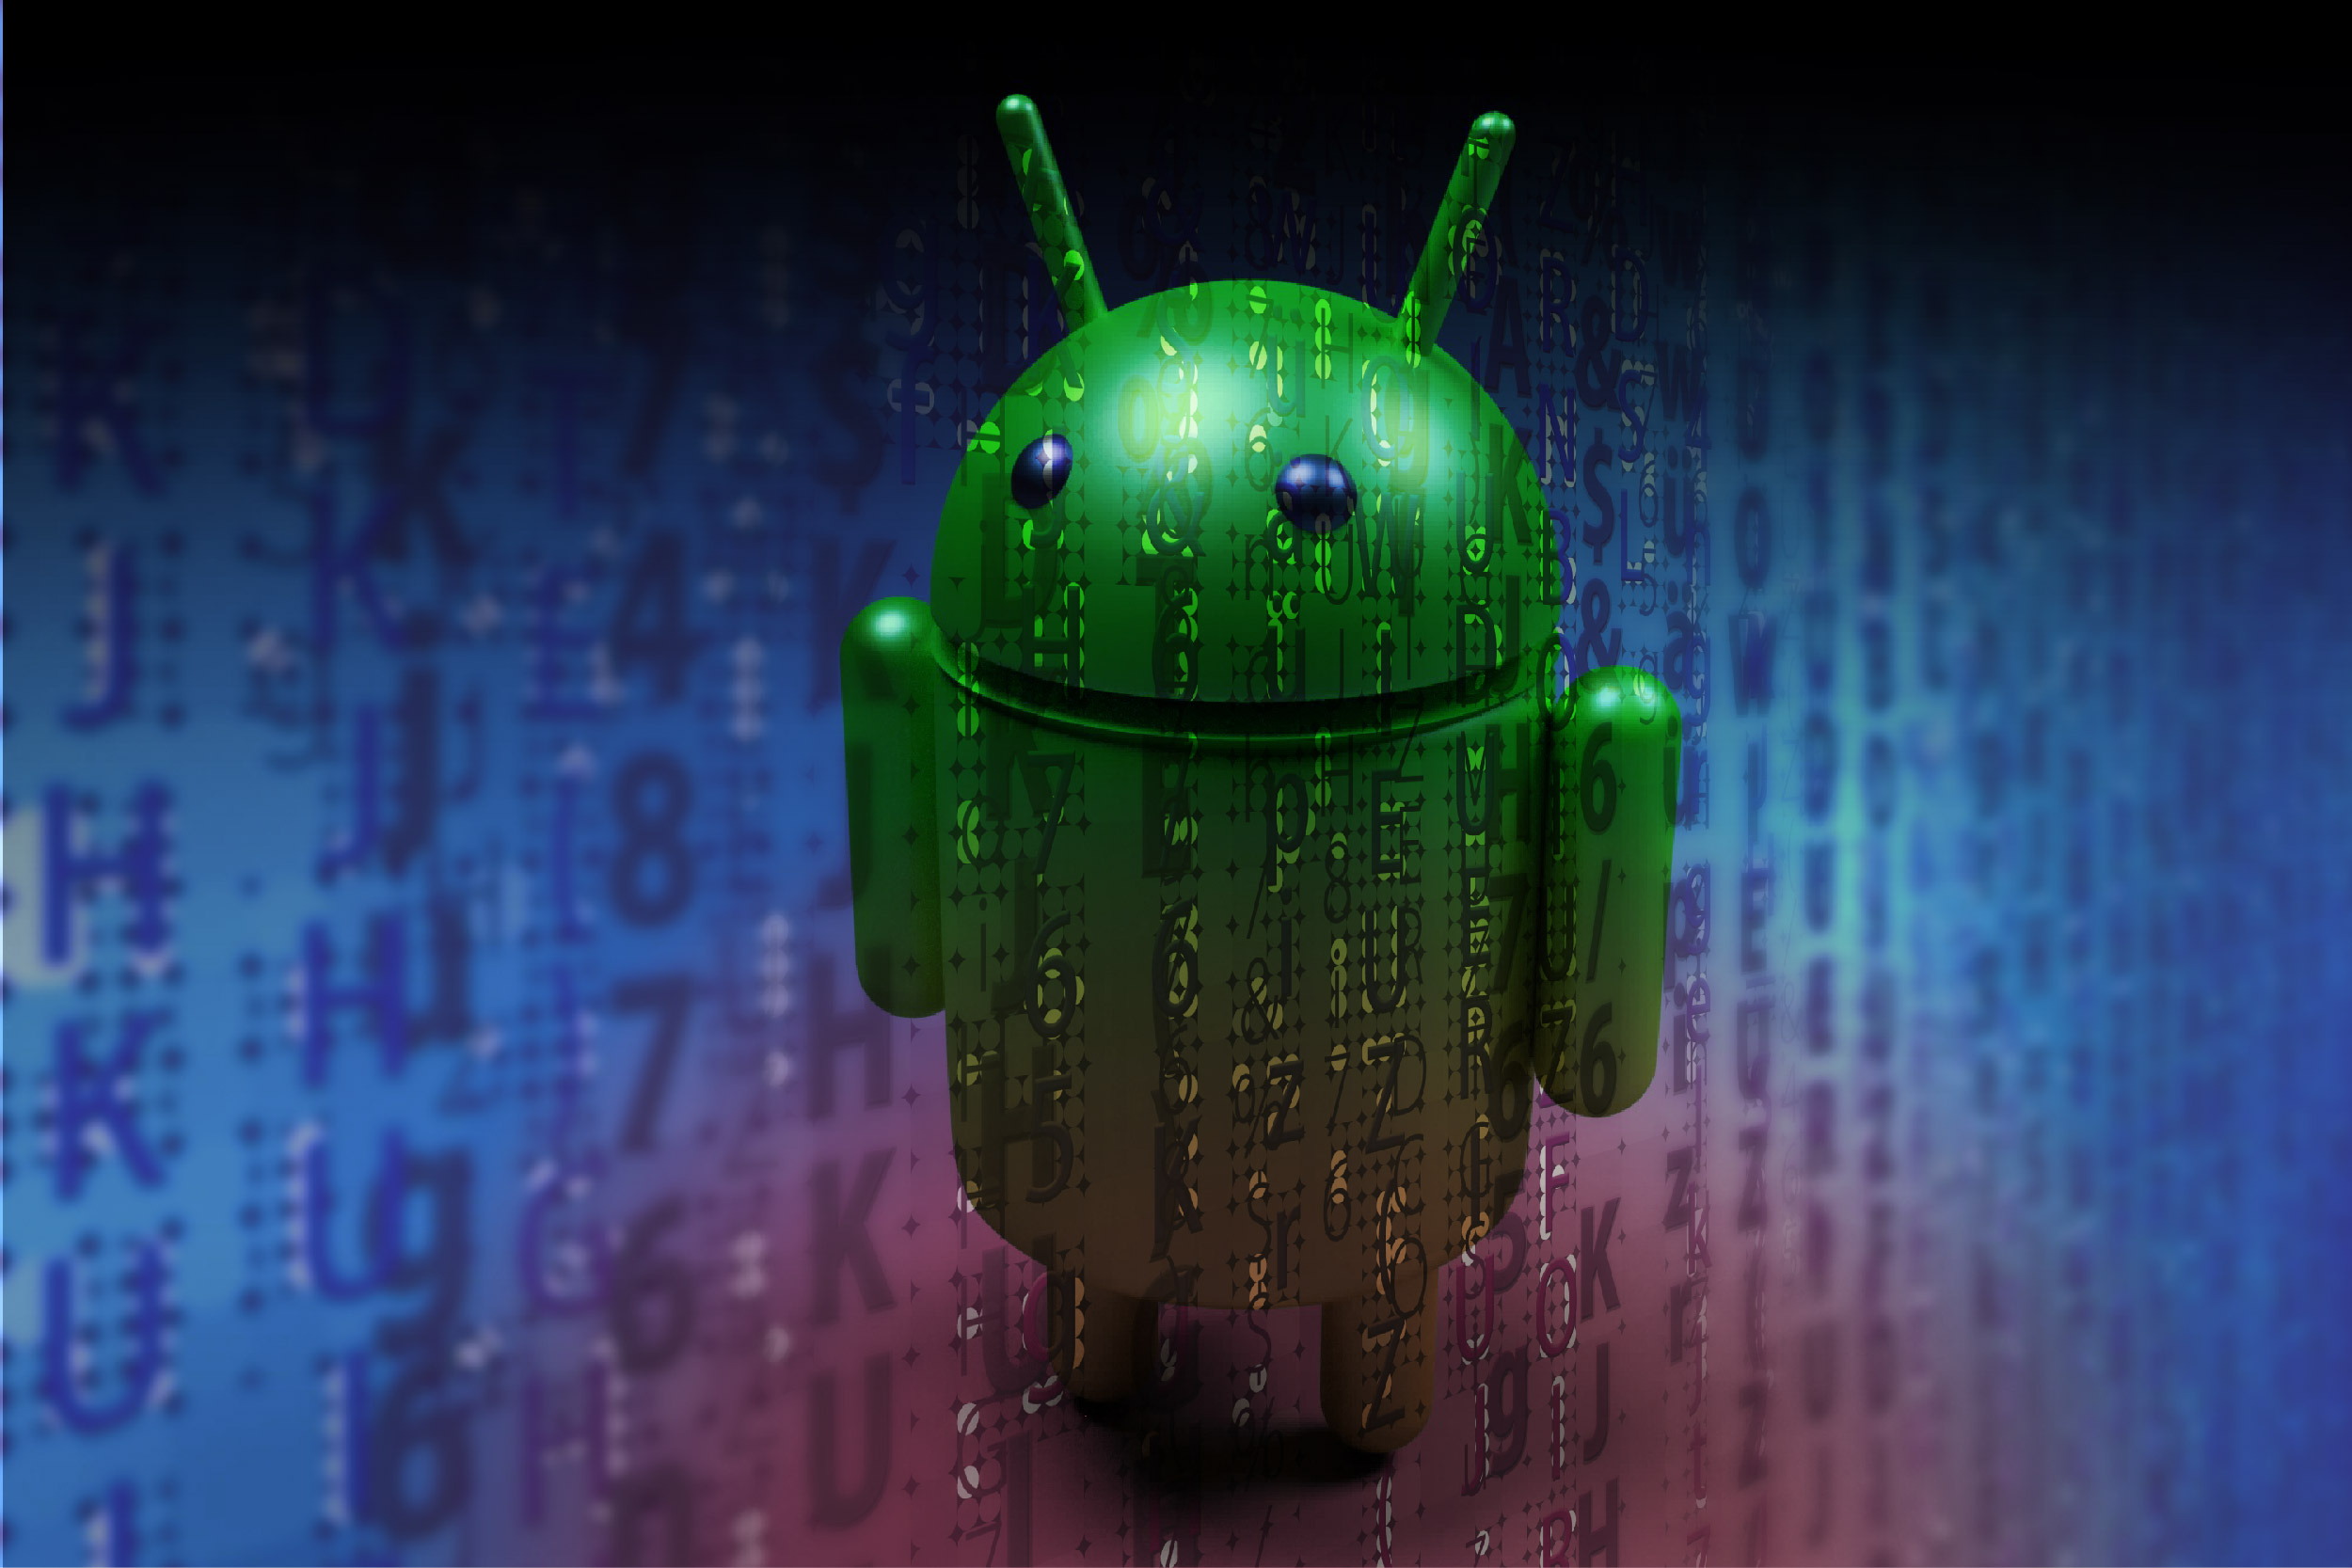 Urgent warning as 300,000 Android owners infected by dangerous app